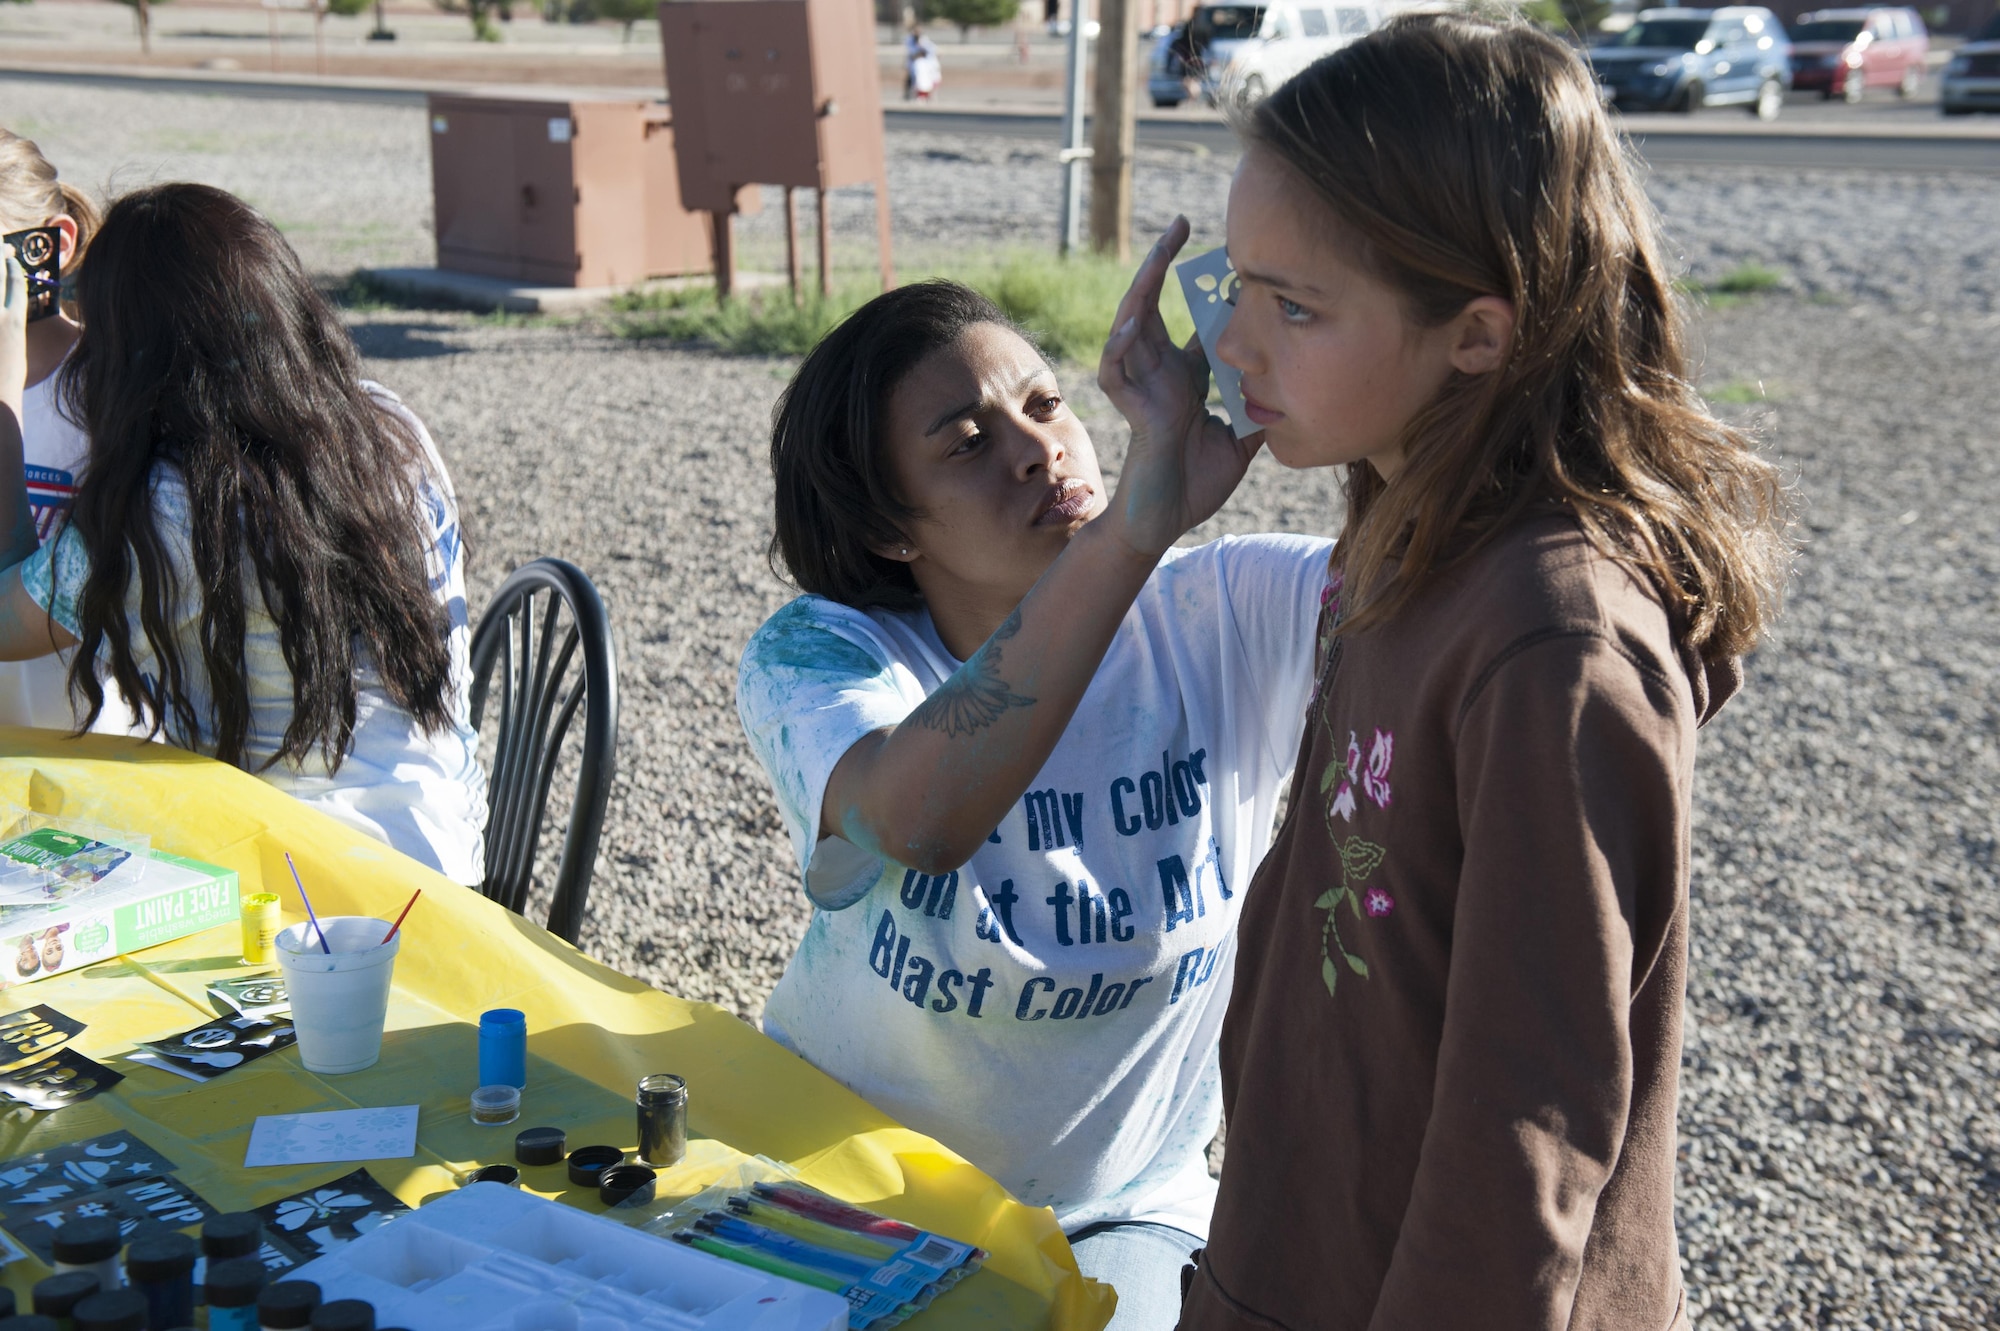 The Youth and Teen Center hosted the Art Blast color run 5K and the America’s Armed Forces Kids fun run on at Holloman Air Force Base, N.M on May 20, 2017. Volunteers set up tables at the fitness center outdoor track with face paint and shirts to hand out to the race participants. (U.S. Air Force photo by Airman 1st Class Ilyana A. Escalona)